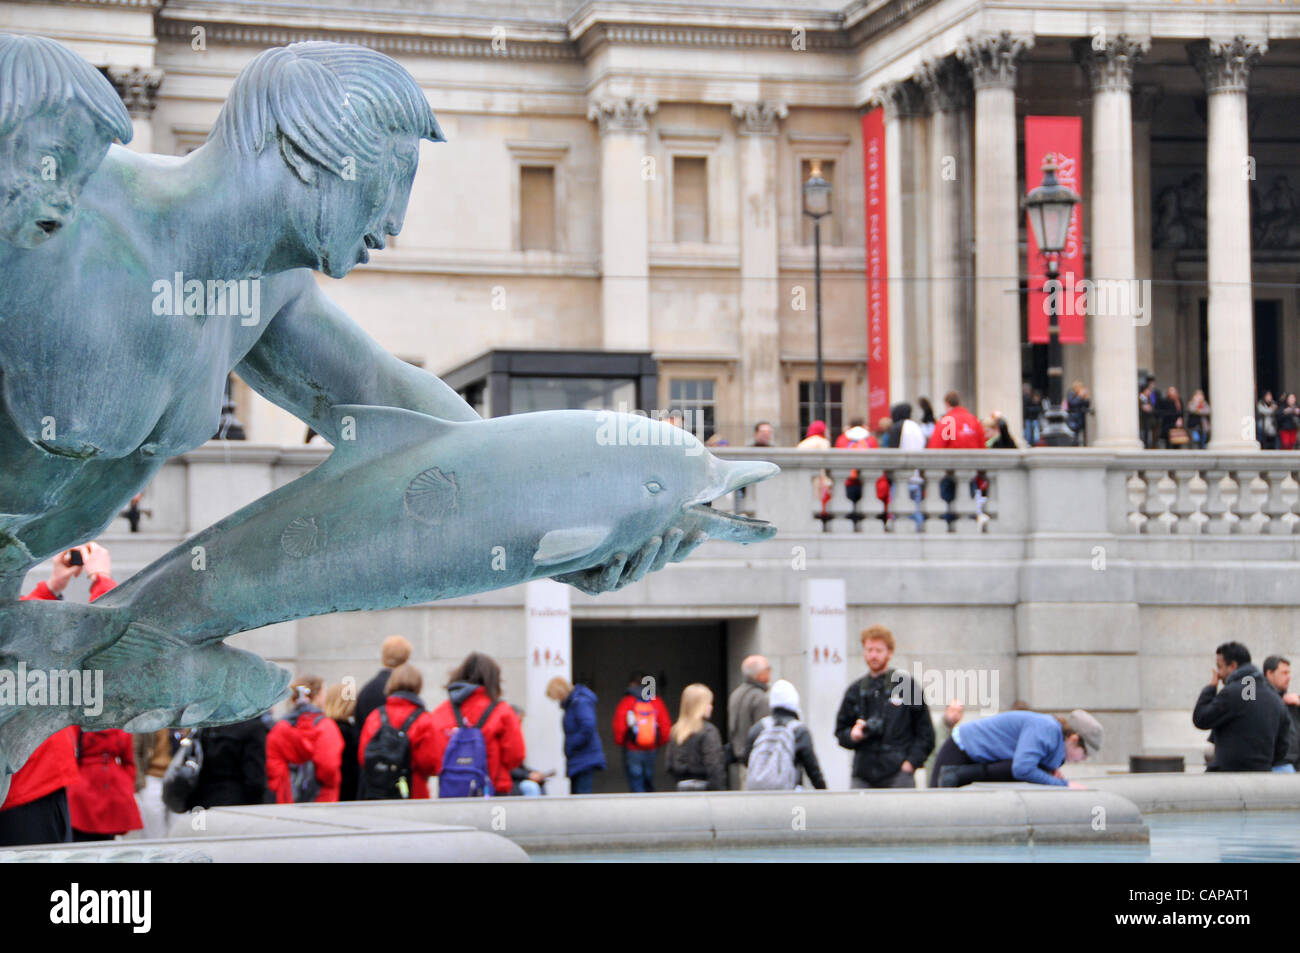 The National Gallery, Trafalgar Square, London 5/4/12. The fountains are turned off in Trafalgar Square as the hosepipe ban starts in London and the South East due to the drought. Stock Photo